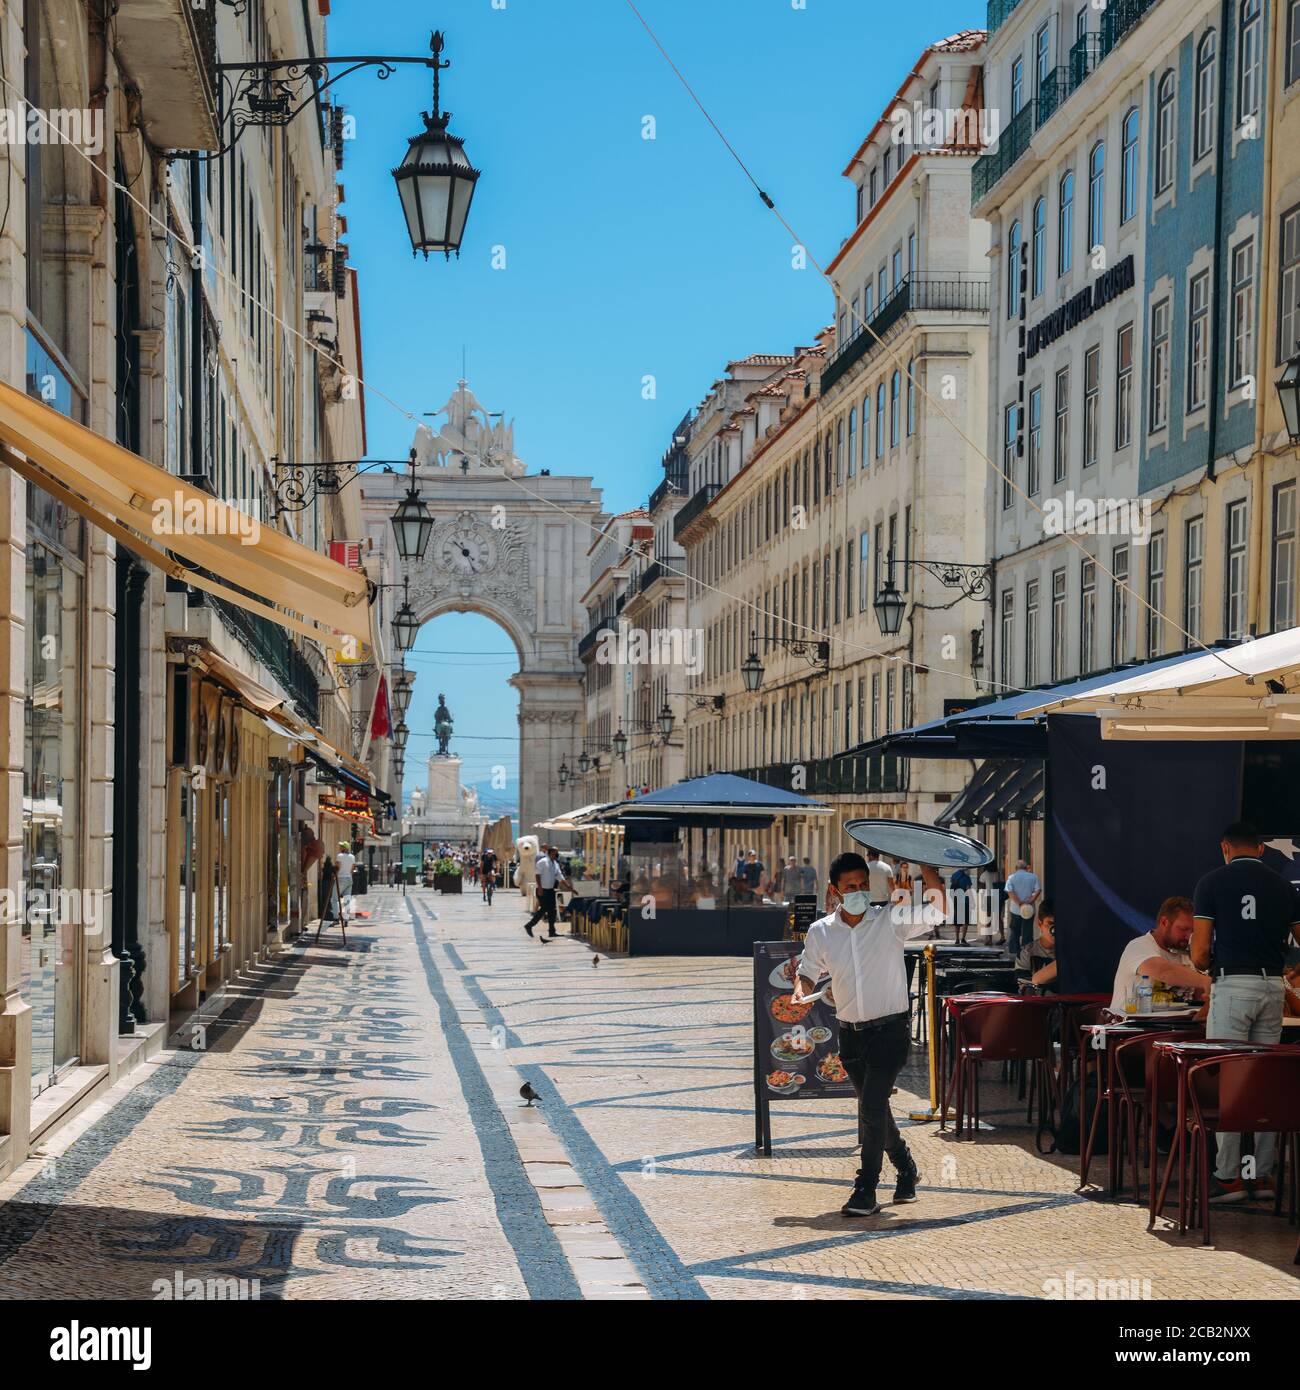 Almost deserted Augusta Street in Baixa, Lisbon, Portugal during the Coronavirus Covid-19 outbreak as many tourists decide to stay at home Stock Photo